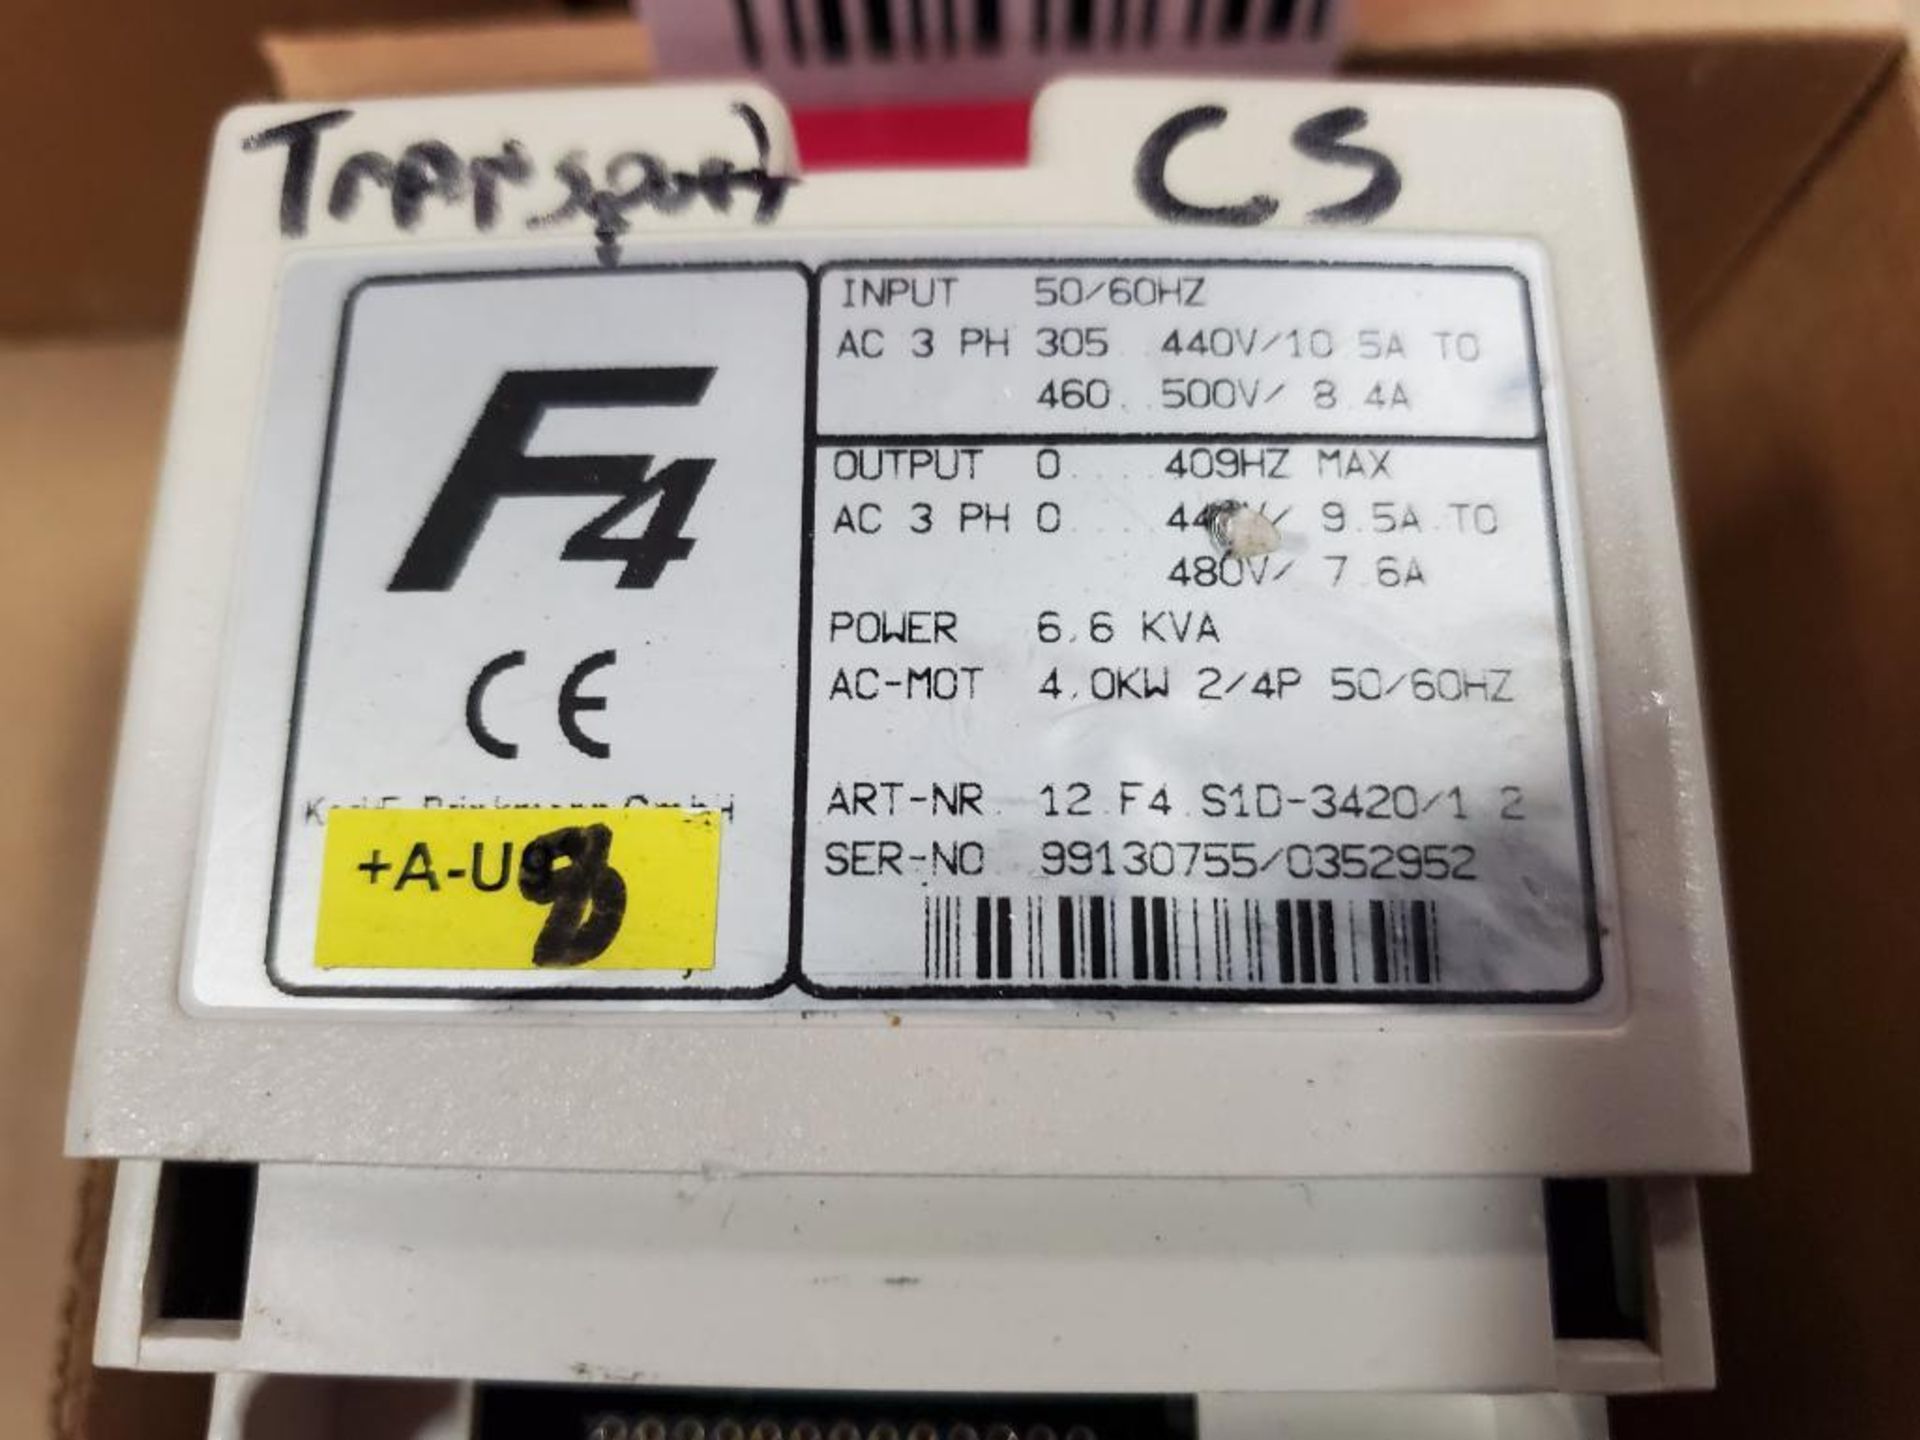 KEB F4 12.F4.S1D-3420/1 2 frequency converter drive. 6.6kVA. - Image 2 of 3